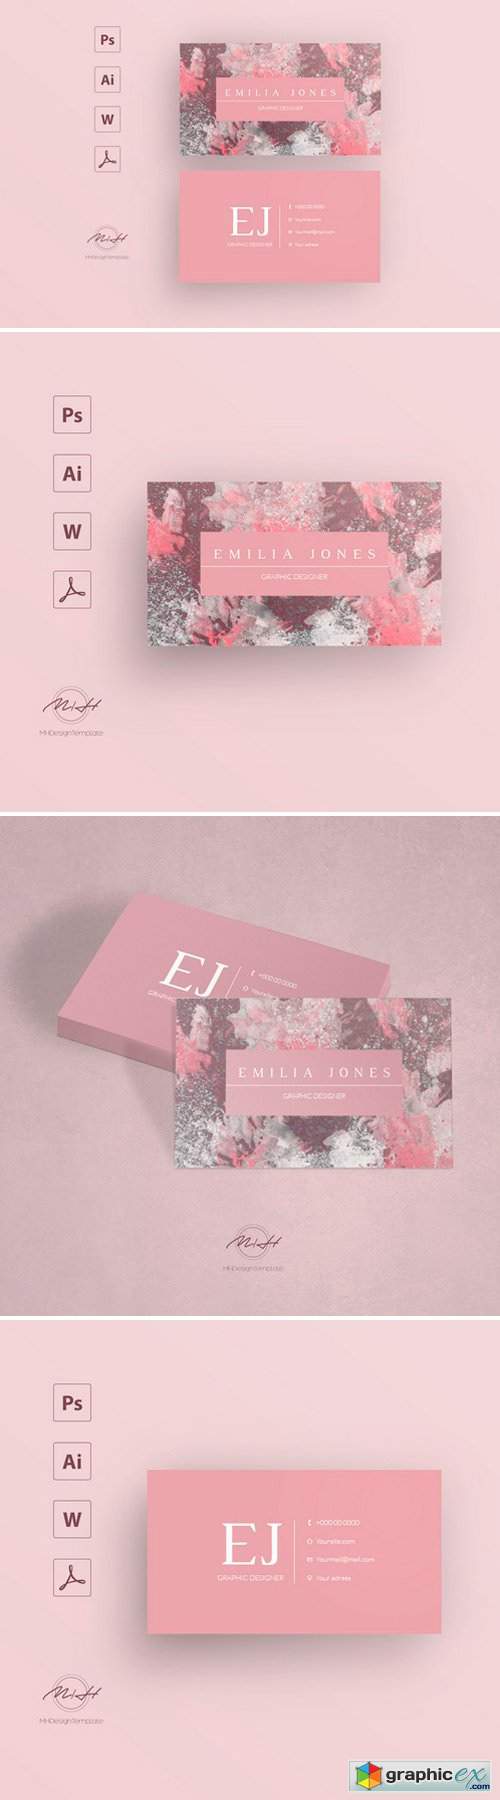 Marble business card template